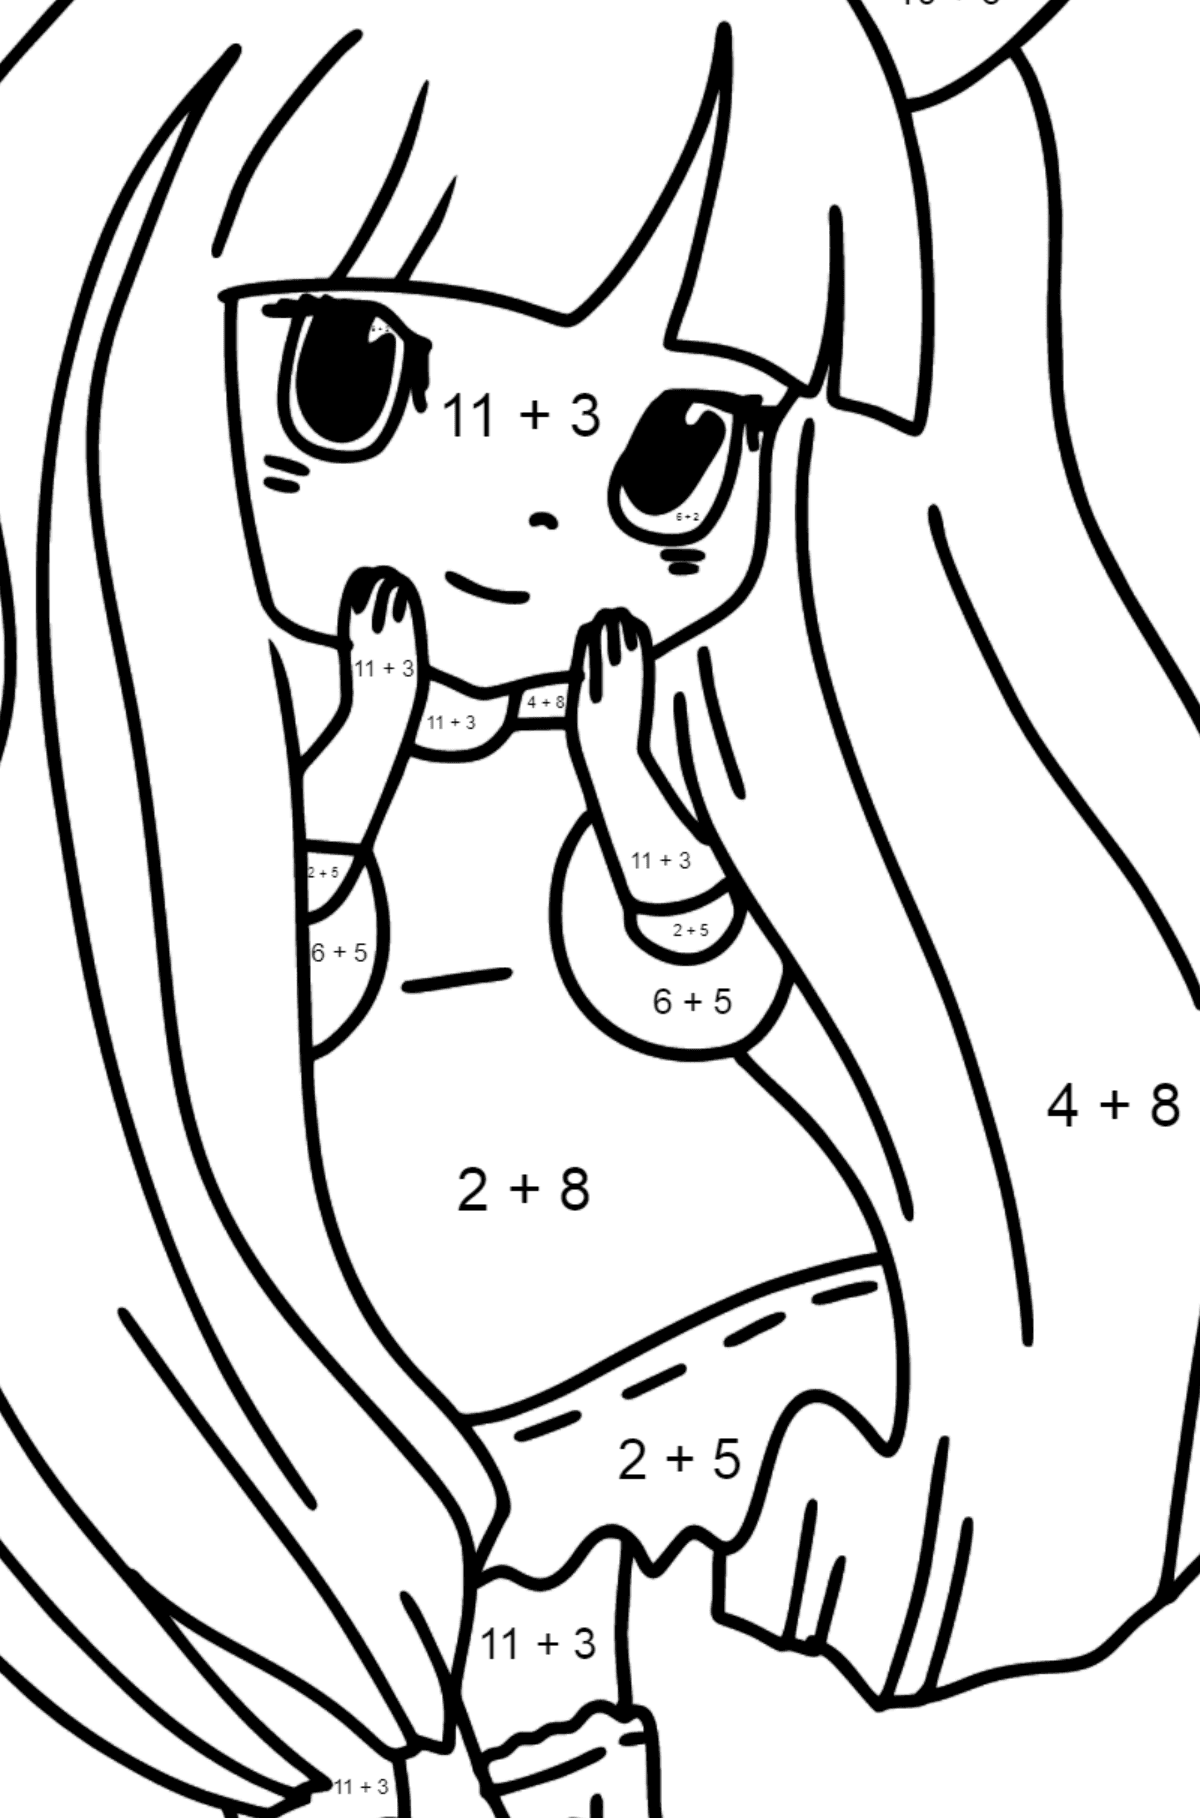 Anime Bunny Girl Coloring Pages - Math Coloring - Addition for Kids